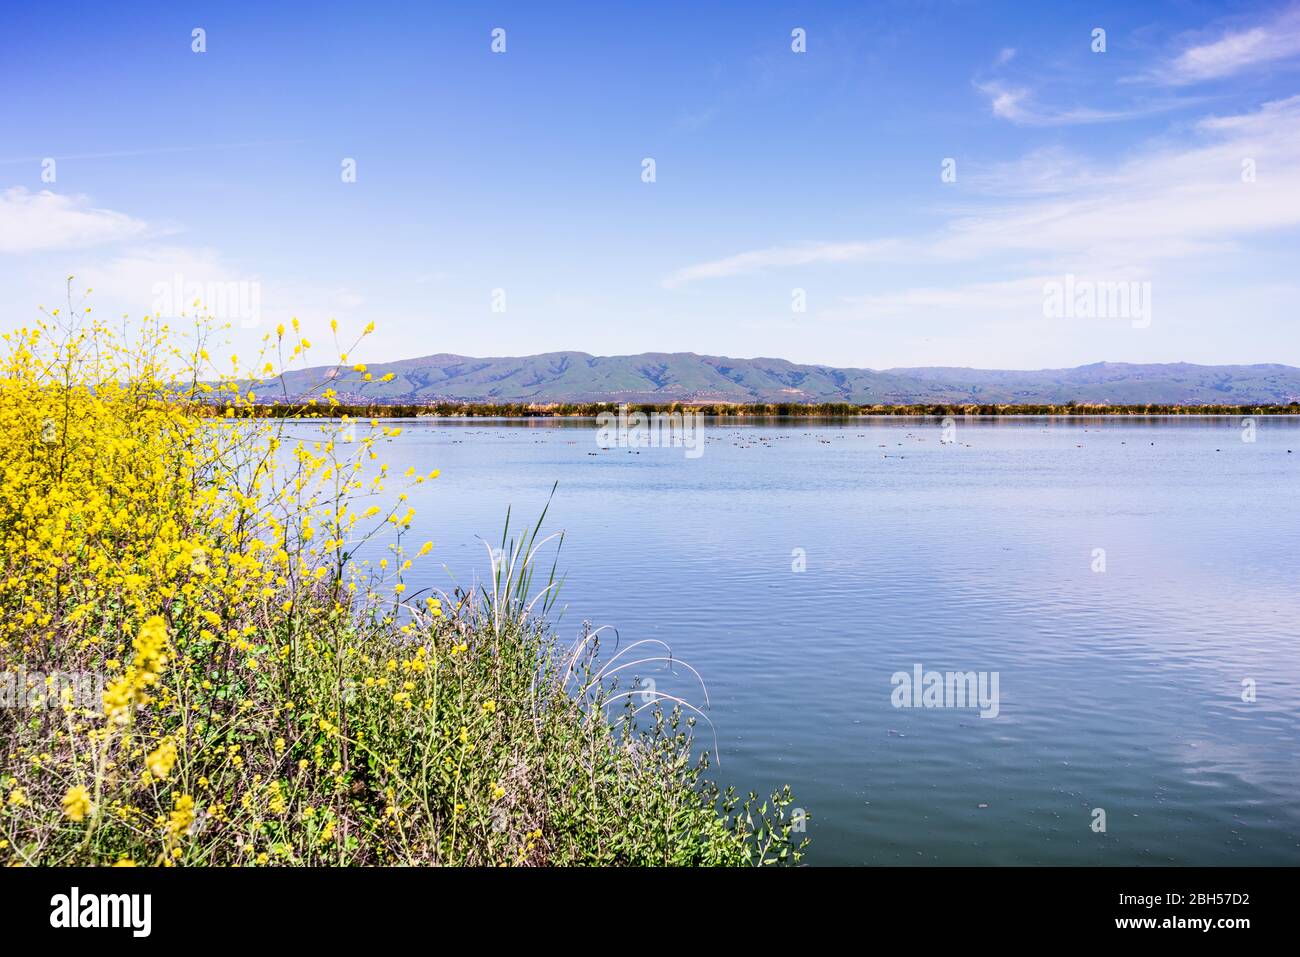 Spring landscape in the wetlands of South San Francisco Bay Area, with wild mustard flowers blooming on the shoreline, and waterfowl swimming on the c Stock Photo